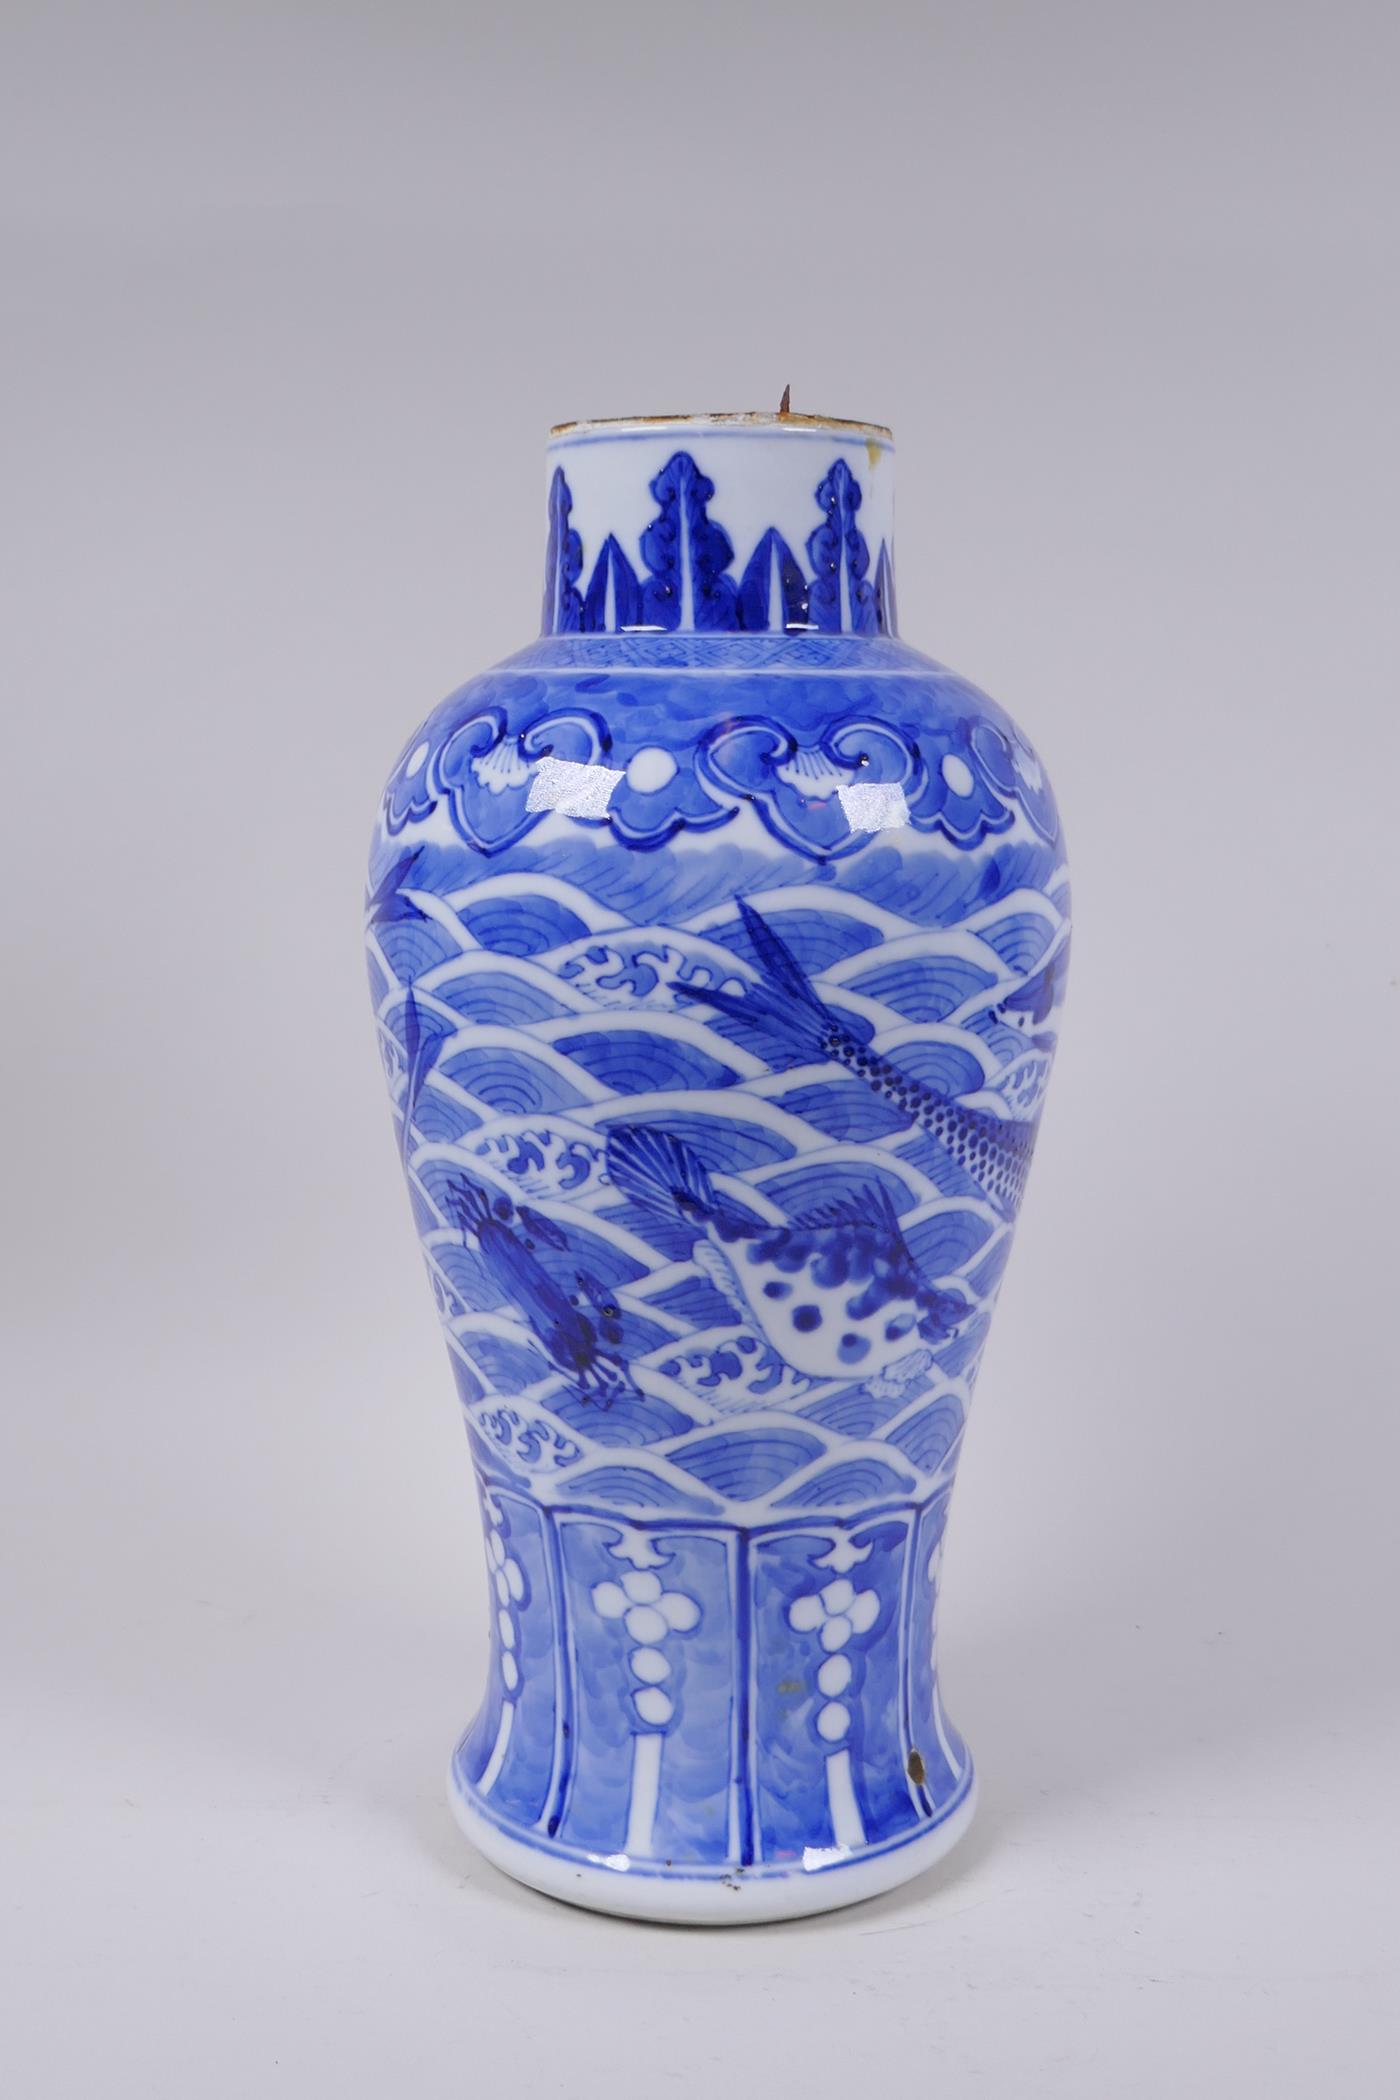 A C19th Chinese blue and white porcelain vase decorated with carp and crabs, Xuande 4 character mark - Image 3 of 9